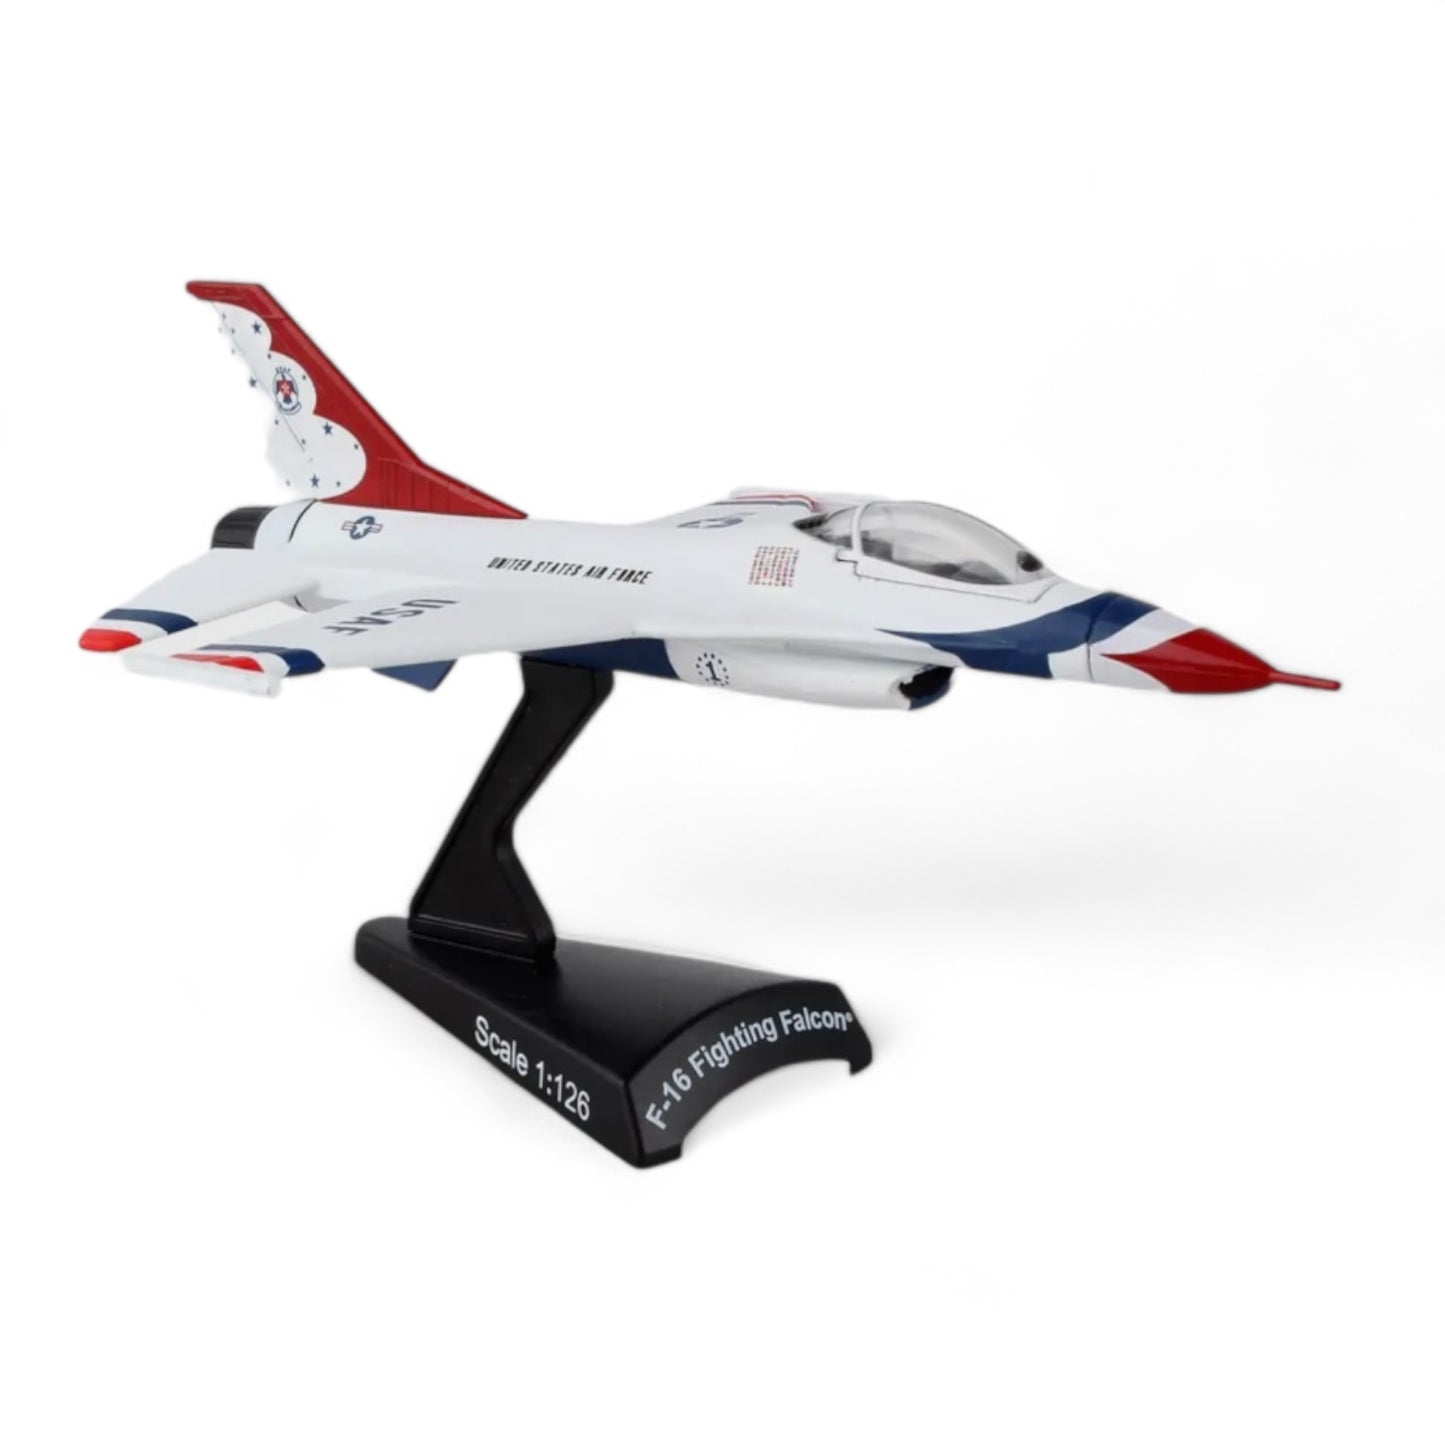 Thunderbirds F-16 Fighting Falcon® Postage Stamp Model